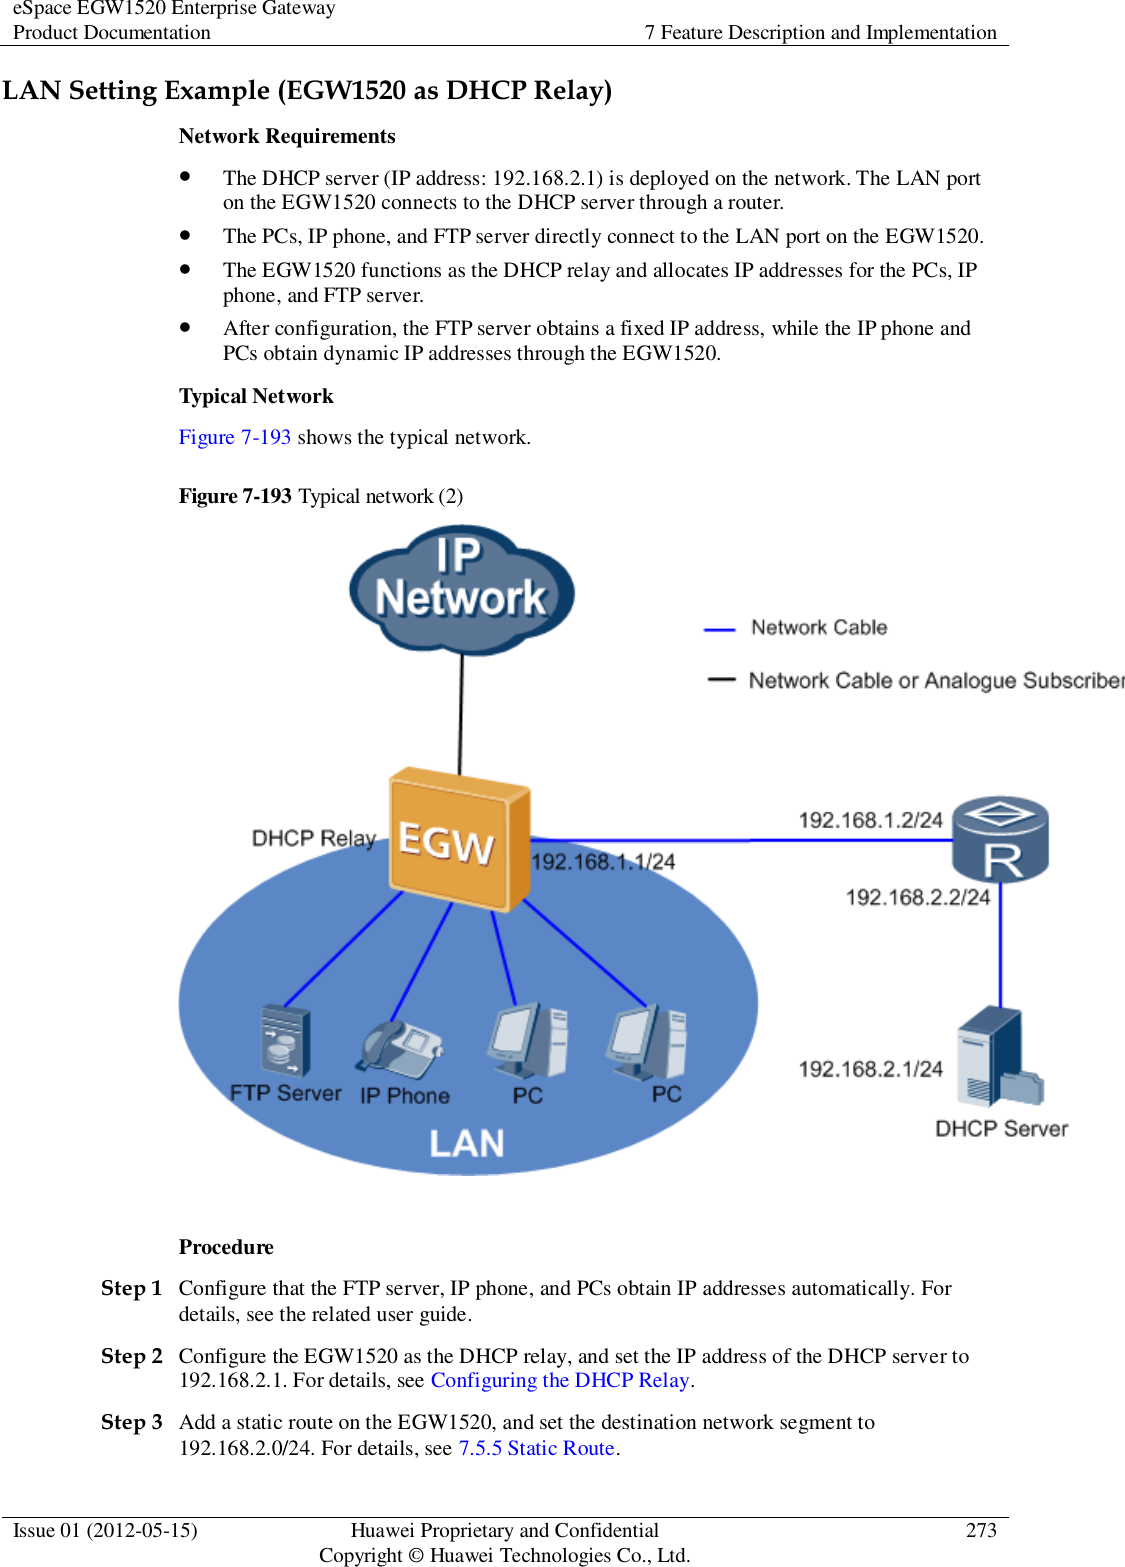 eSpace EGW1520 Enterprise Gateway Product Documentation 7 Feature Description and Implementation  Issue 01 (2012-05-15) Huawei Proprietary and Confidential                                     Copyright © Huawei Technologies Co., Ltd. 273  LAN Setting Example (EGW1520 as DHCP Relay) Network Requirements  The DHCP server (IP address: 192.168.2.1) is deployed on the network. The LAN port on the EGW1520 connects to the DHCP server through a router.  The PCs, IP phone, and FTP server directly connect to the LAN port on the EGW1520.  The EGW1520 functions as the DHCP relay and allocates IP addresses for the PCs, IP phone, and FTP server.  After configuration, the FTP server obtains a fixed IP address, while the IP phone and PCs obtain dynamic IP addresses through the EGW1520. Typical Network Figure 7-193 shows the typical network. Figure 7-193 Typical network (2)   Procedure Step 1 Configure that the FTP server, IP phone, and PCs obtain IP addresses automatically. For details, see the related user guide. Step 2 Configure the EGW1520 as the DHCP relay, and set the IP address of the DHCP server to 192.168.2.1. For details, see Configuring the DHCP Relay. Step 3 Add a static route on the EGW1520, and set the destination network segment to 192.168.2.0/24. For details, see 7.5.5 Static Route. 